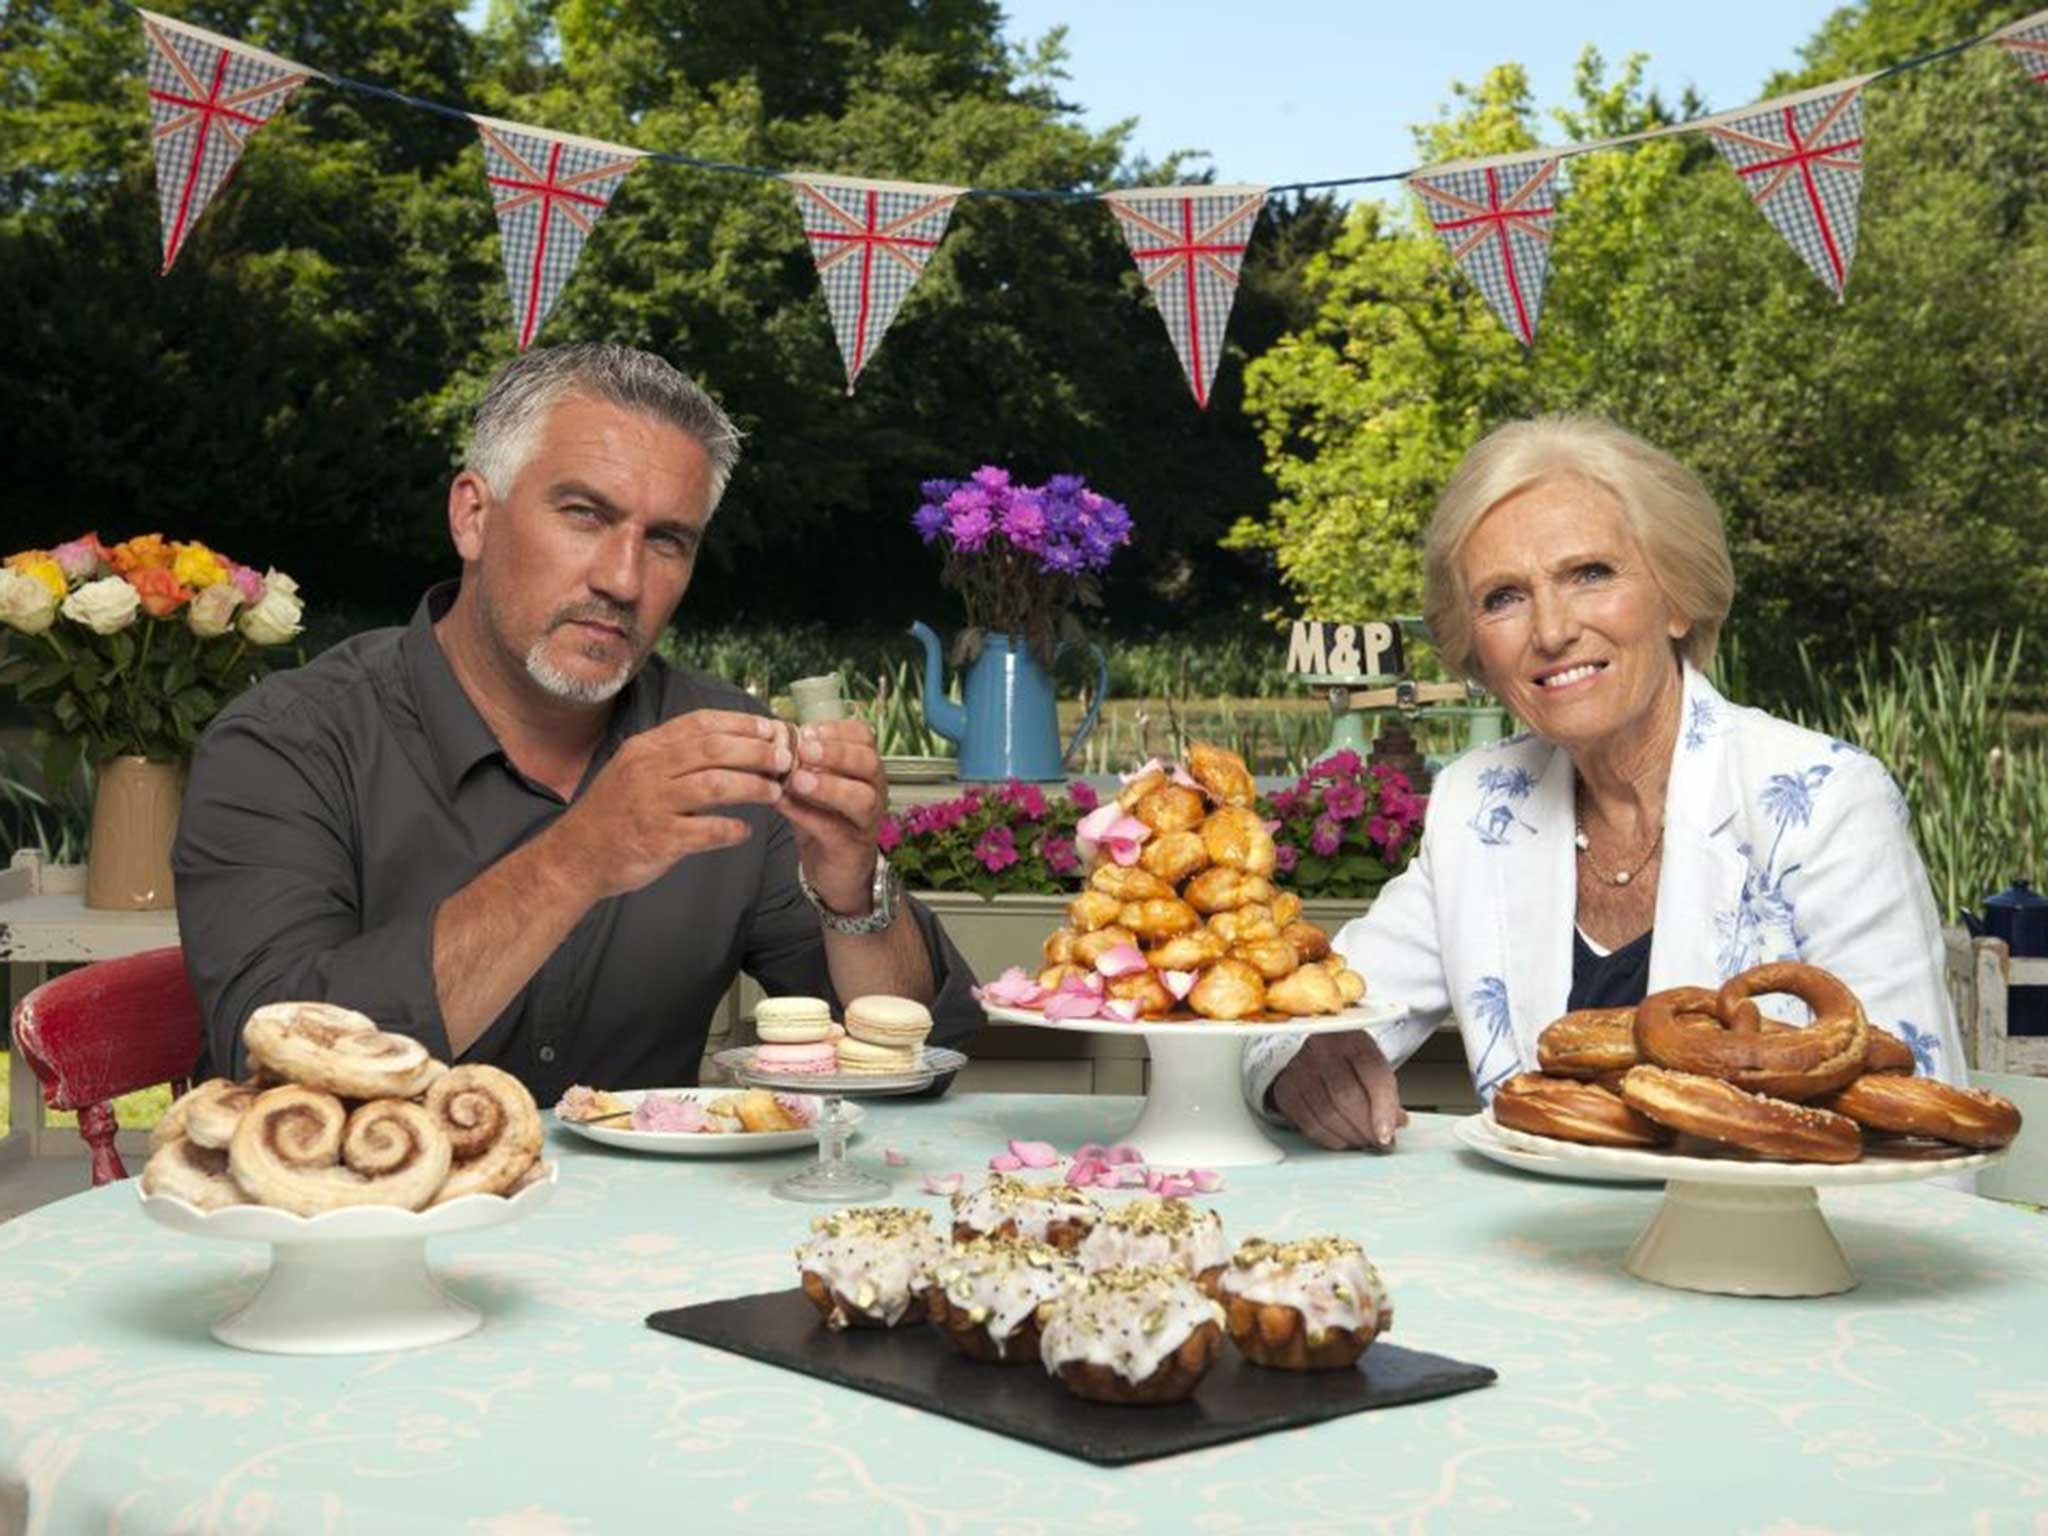 Paul Hollywood and Mary Berry are back judging the new series of the Great British Bake Off, but innuendo controversy is rife